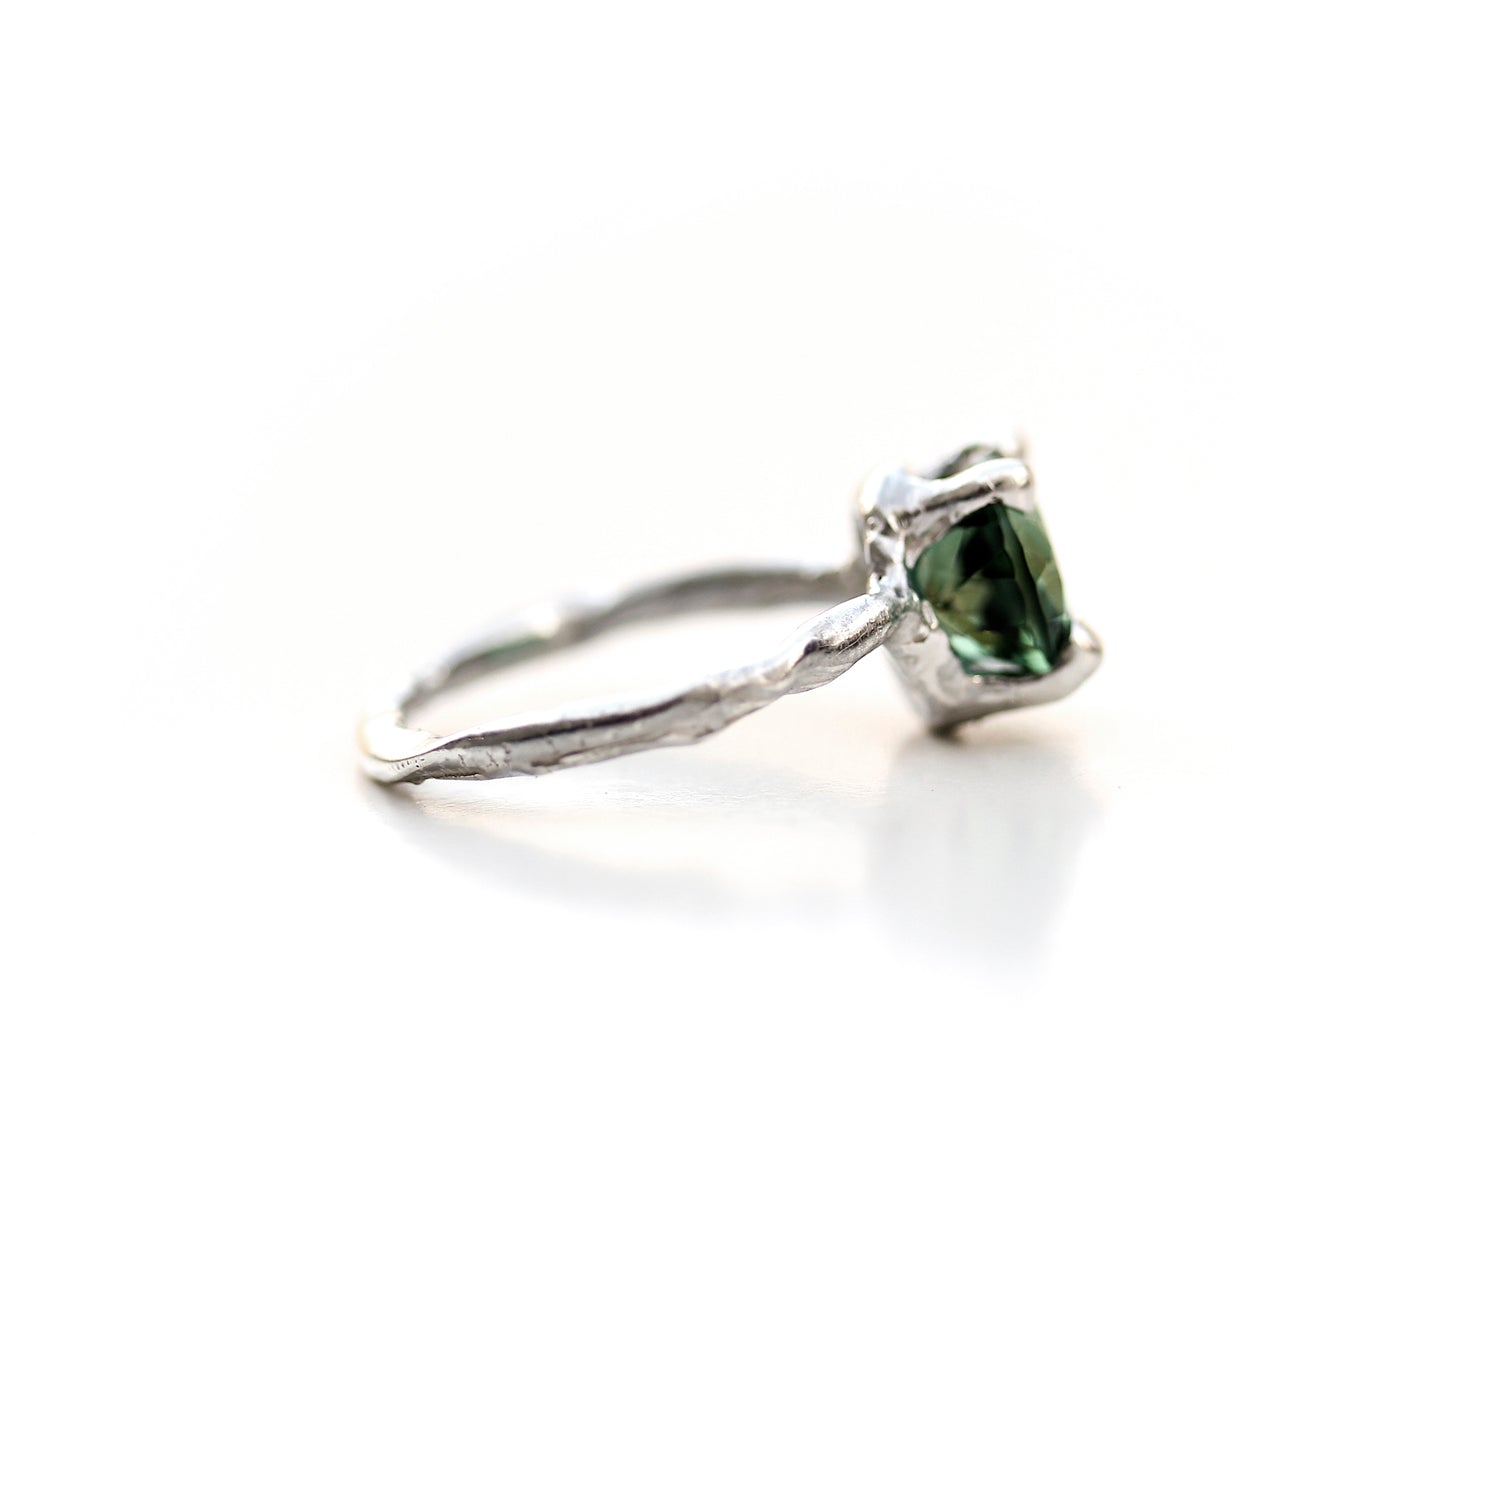 Side View, Green Quartz and Sterling Organic Ring by Katie Poterala Studio